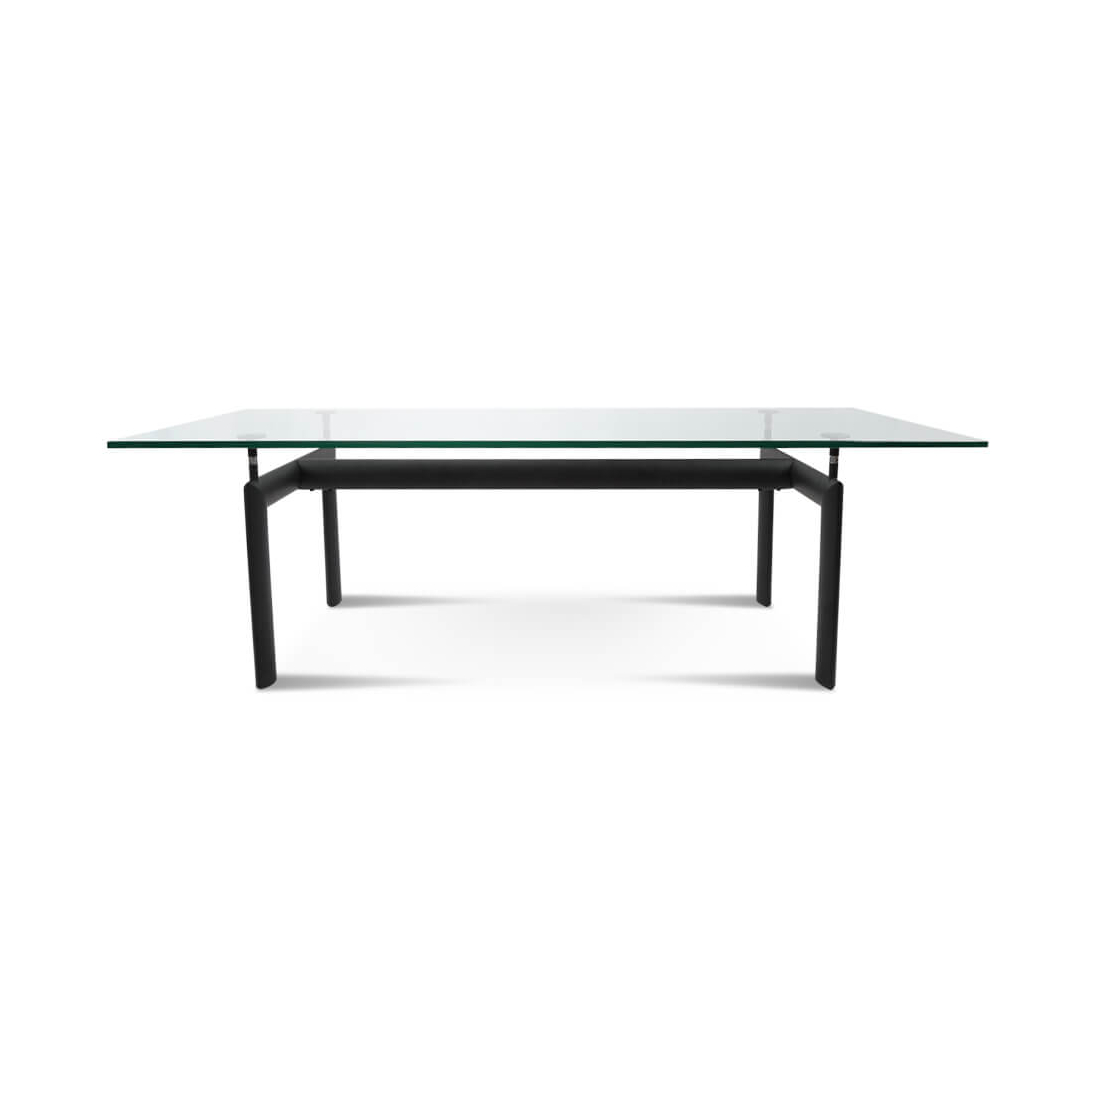 Corbusier Glass Dining Table
